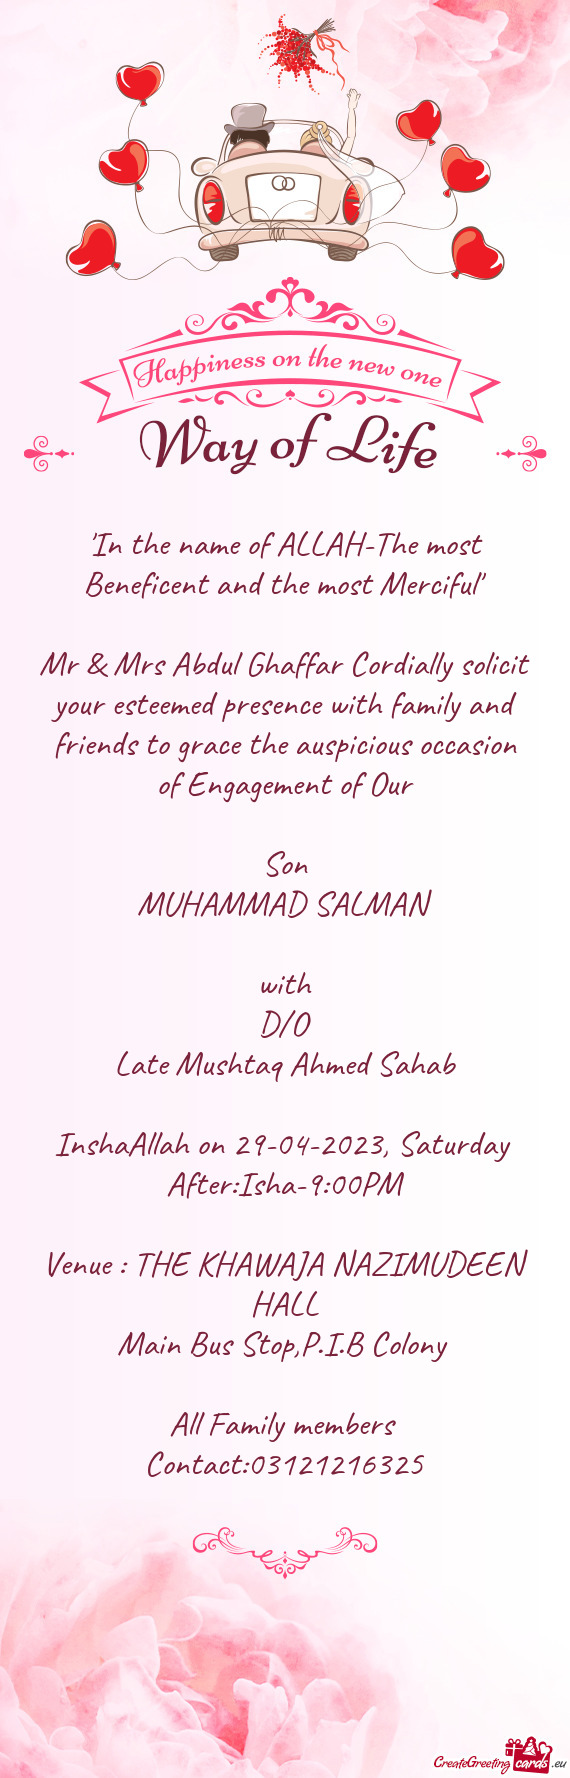 Mr & Mrs Abdul Ghaffar Cordially solicit your esteemed presence with family and friends to grace the